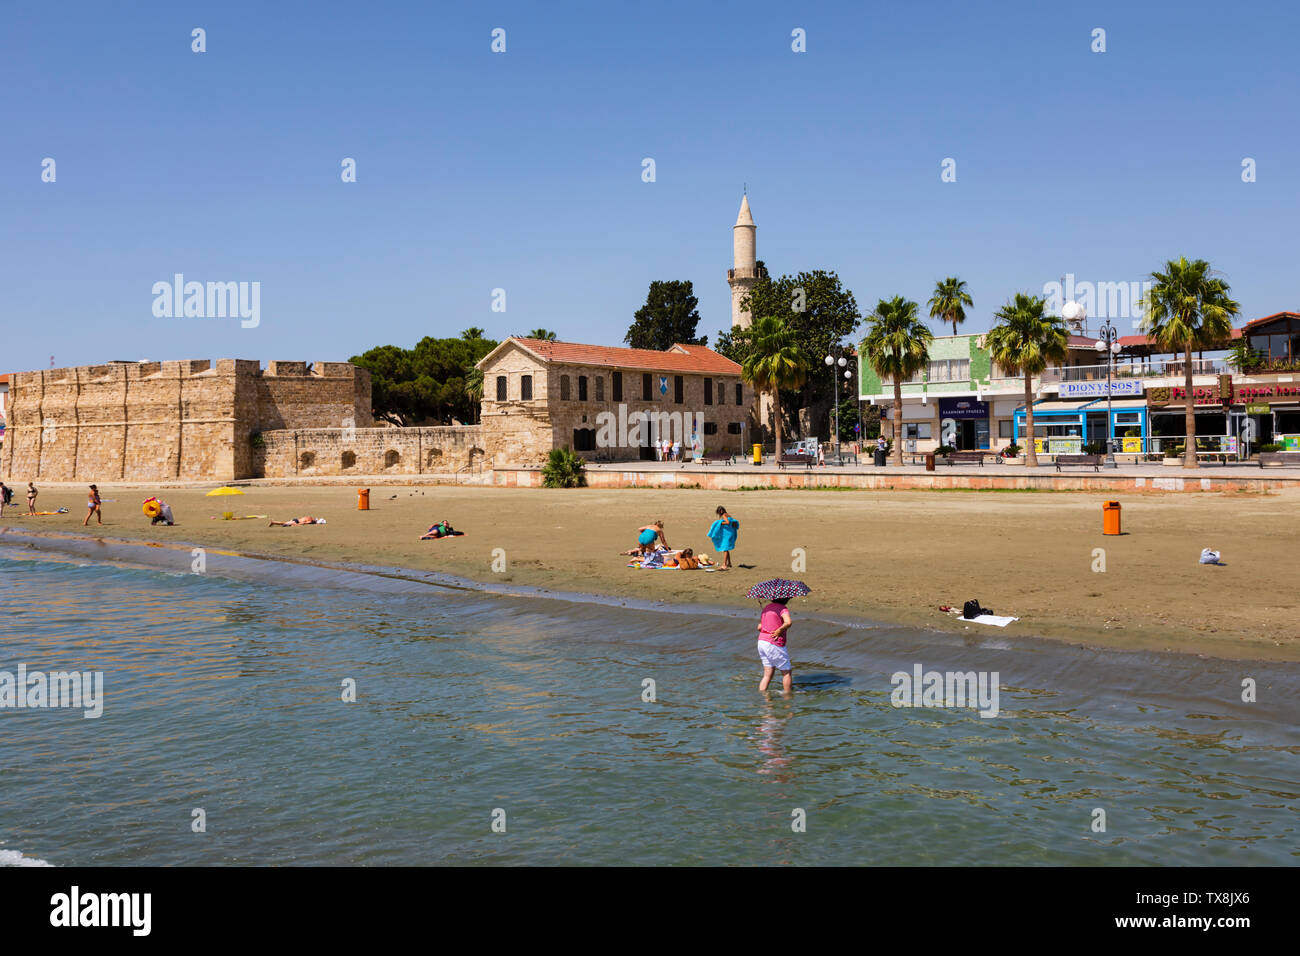 Bathers on the beach at Finikoudis, with the Fort and Mosque in the background. Larnaca, Cyprus. Stock Photo